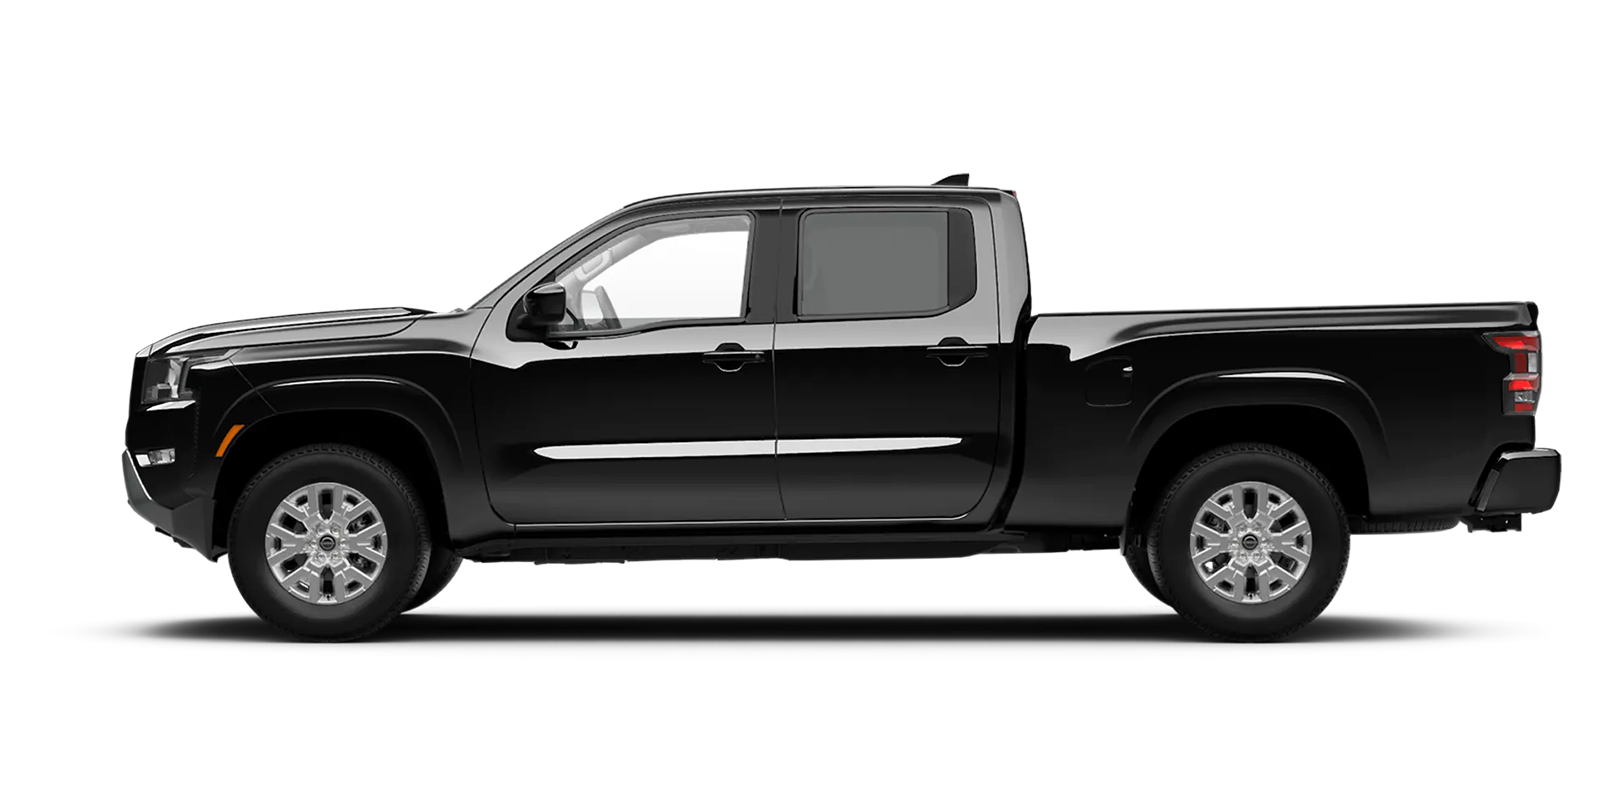 2022 Frontier Crew Cab Long Bed SV 4x4 in Super Black | Nissan of Pittsfield in Pittsfield MA